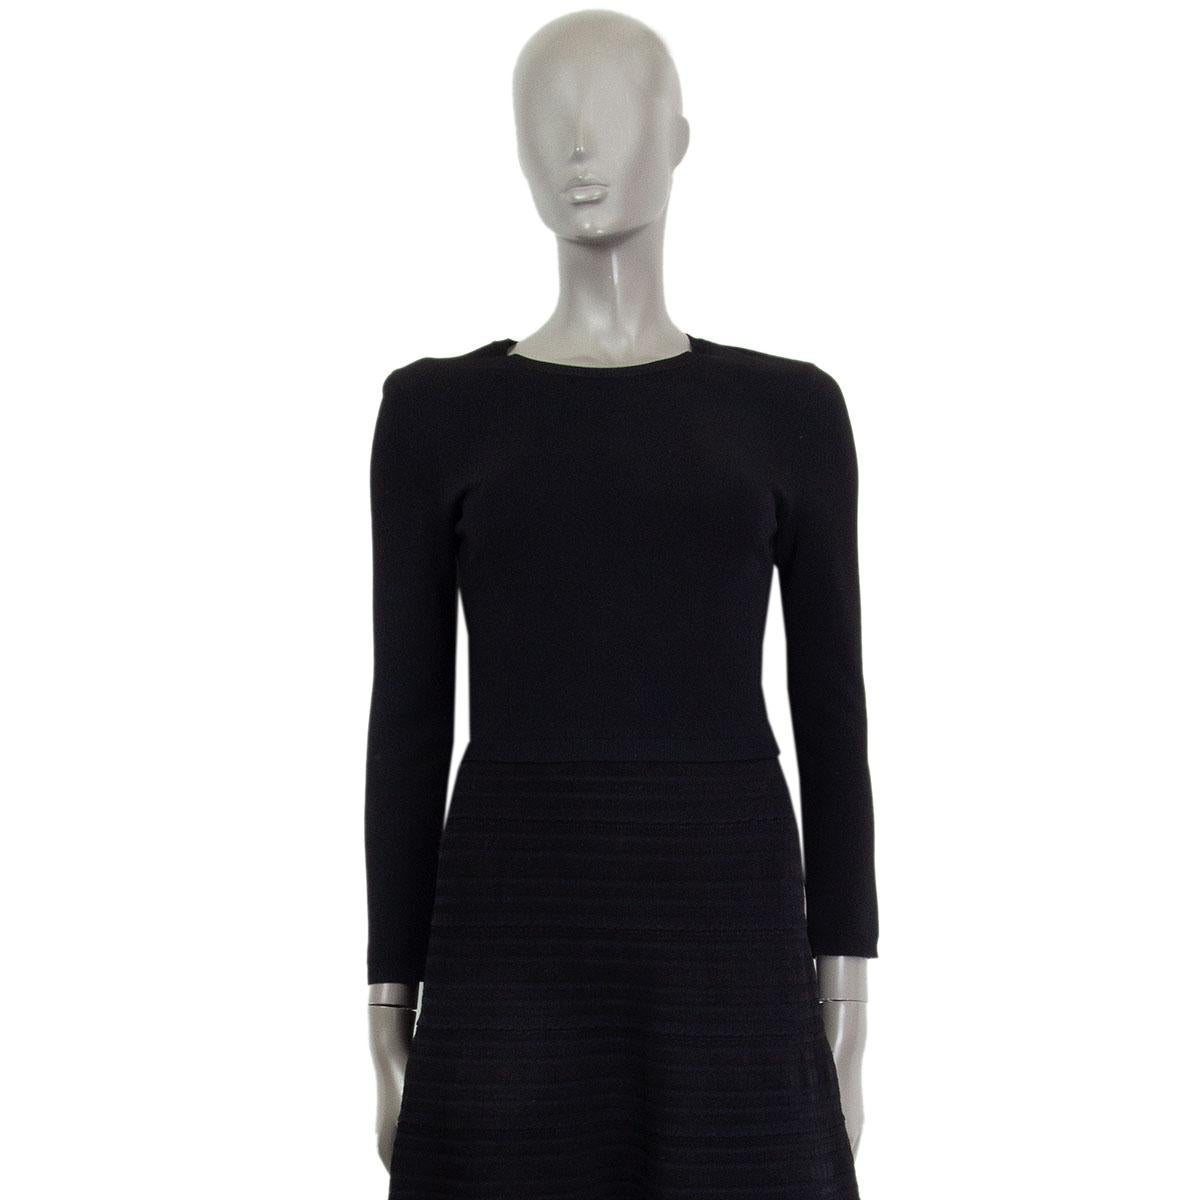 100% authentic Valentino long-sleeve A-line dress in black viscose (83%) and polyester (17%). Opens with a zipper on the back. Has been worn and is in excellent condition.

Tag Size M
Size M
Shoulder Width 38cm (14.8in)
Bust 80cm (31.2in)
Waist 74cm